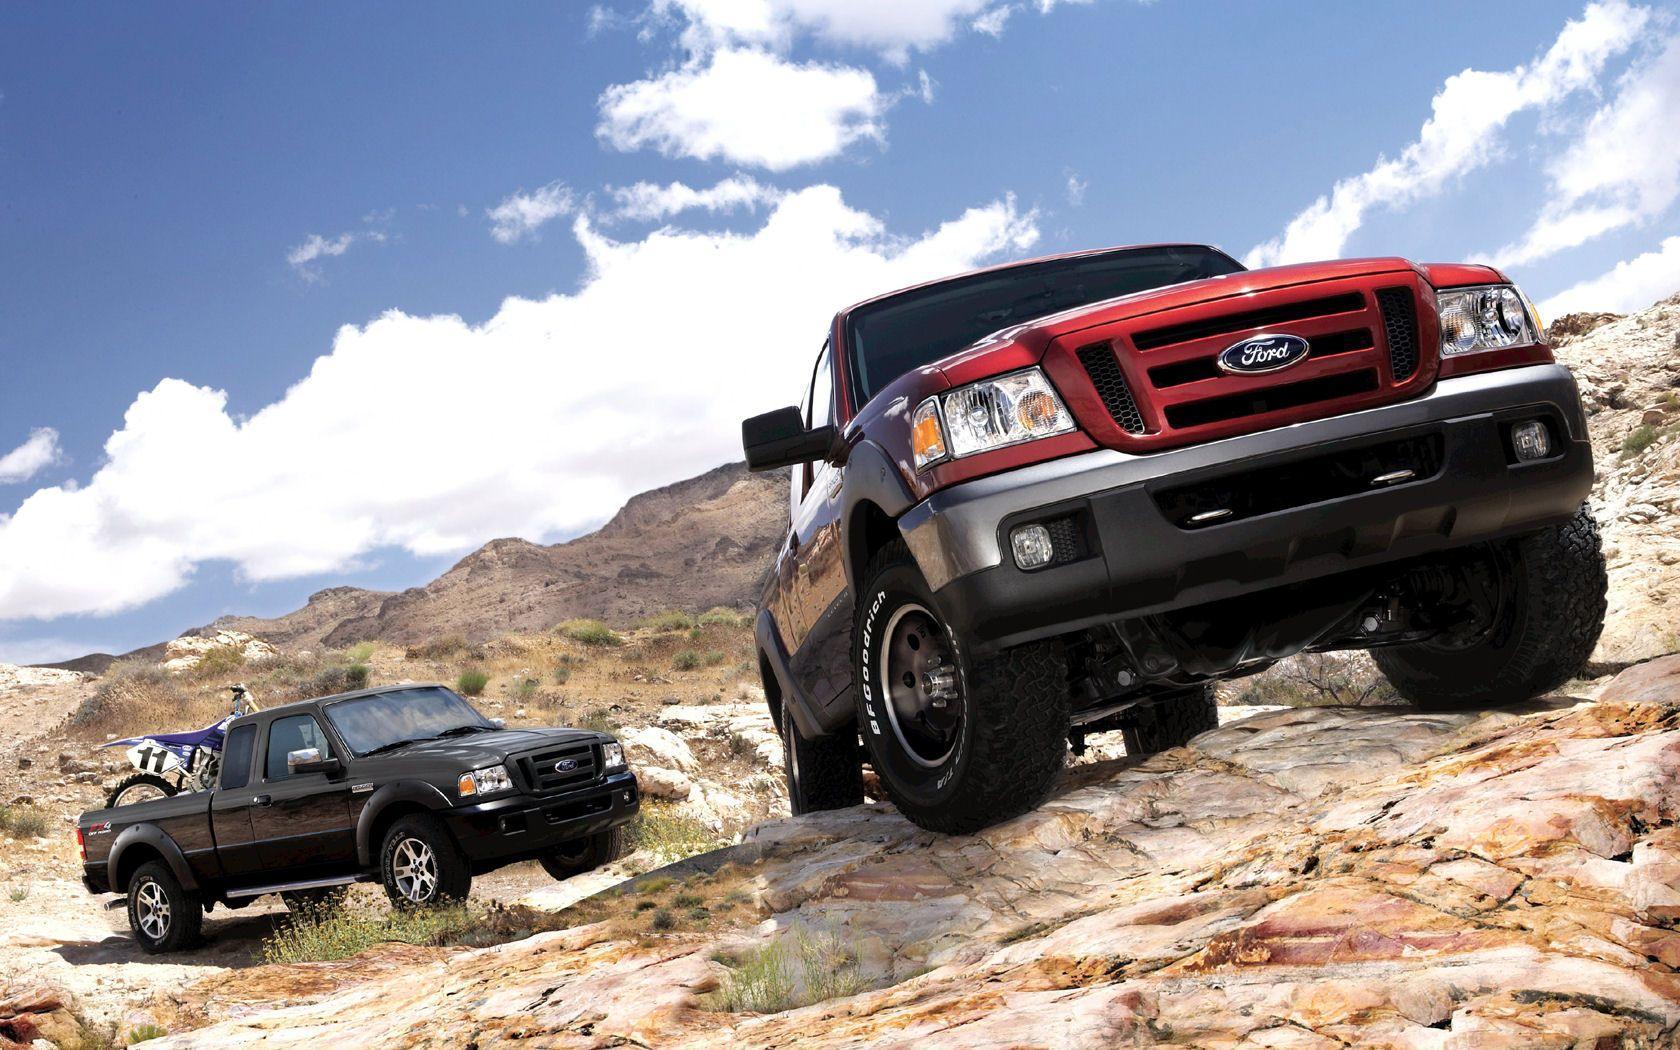 Ford Ranger Wallpapers Wallpaper Cave